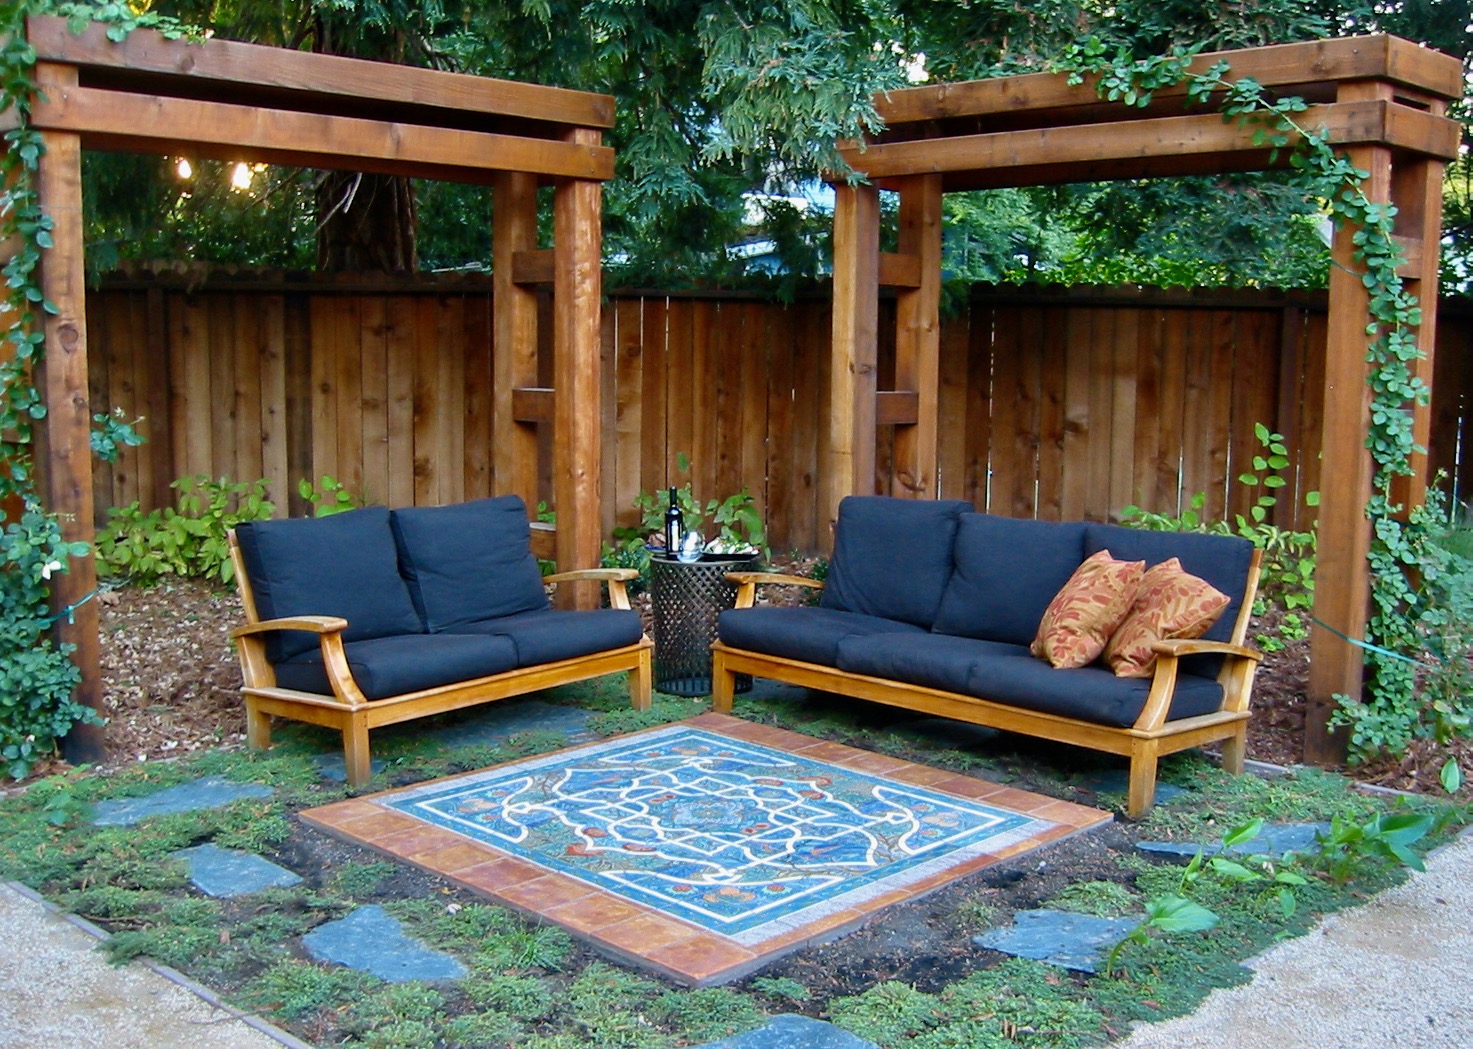 Tile "Rug" for Outdoor Sitting Area